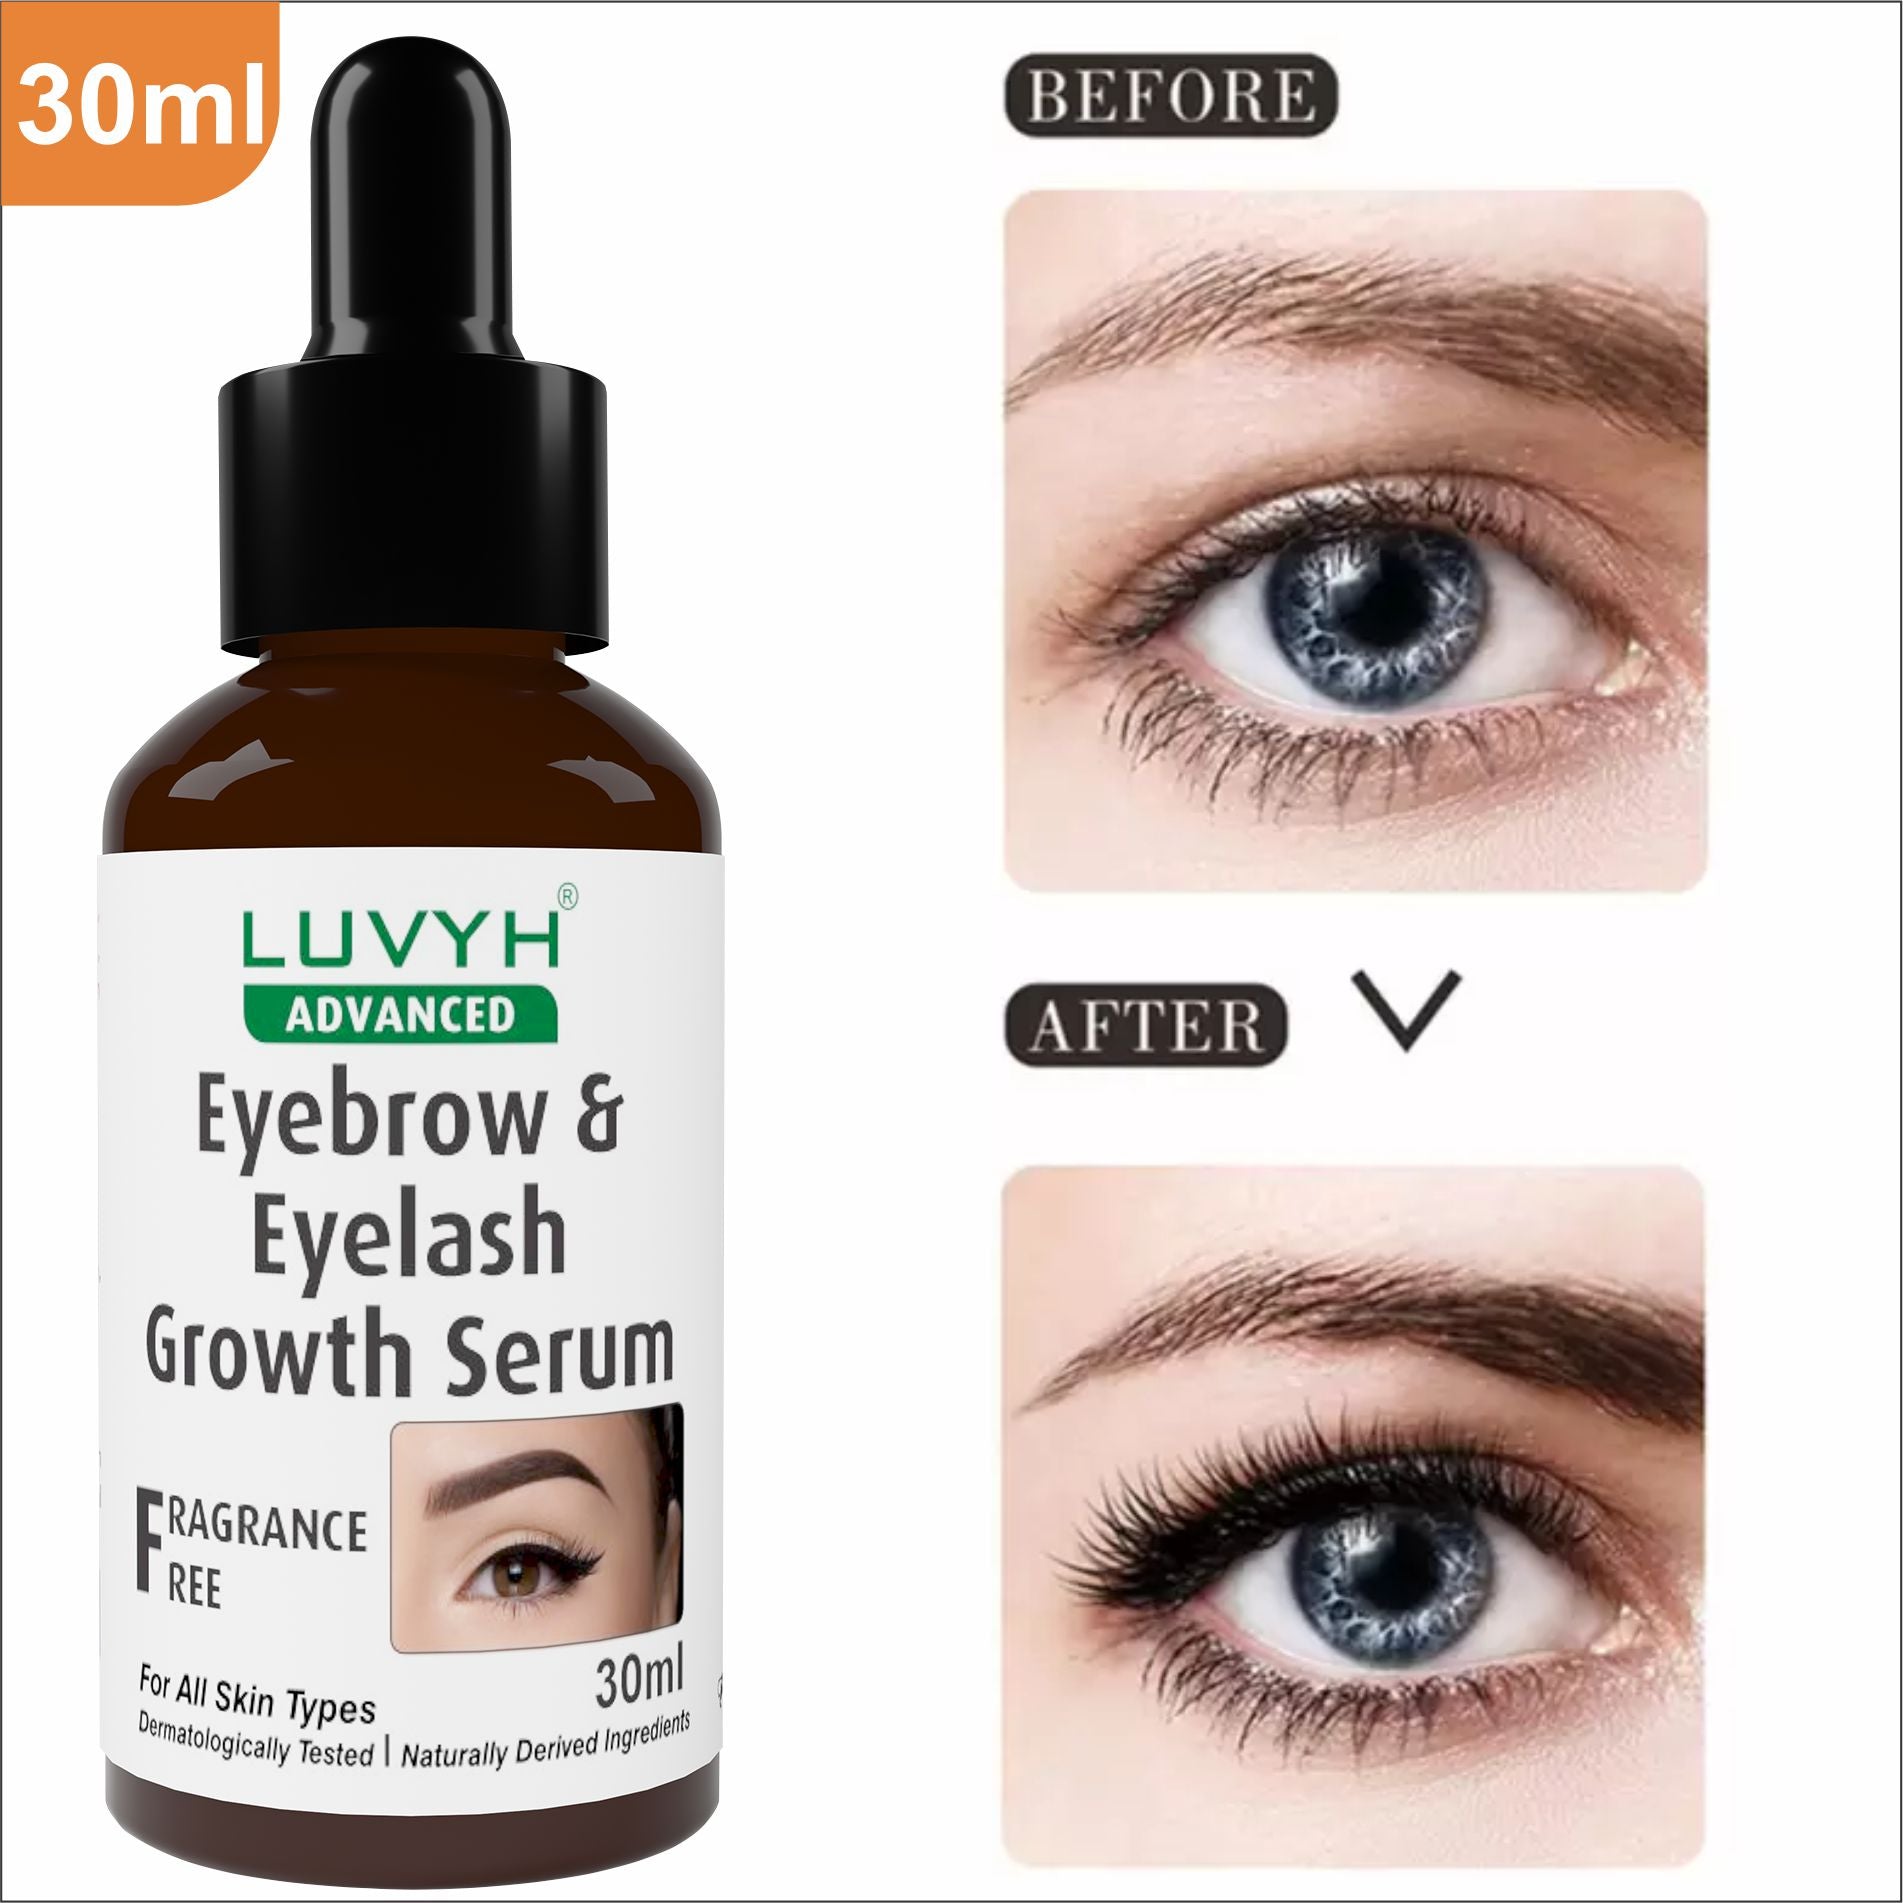 Before and After Results Eyebrow & Eyelash Growth Serum 